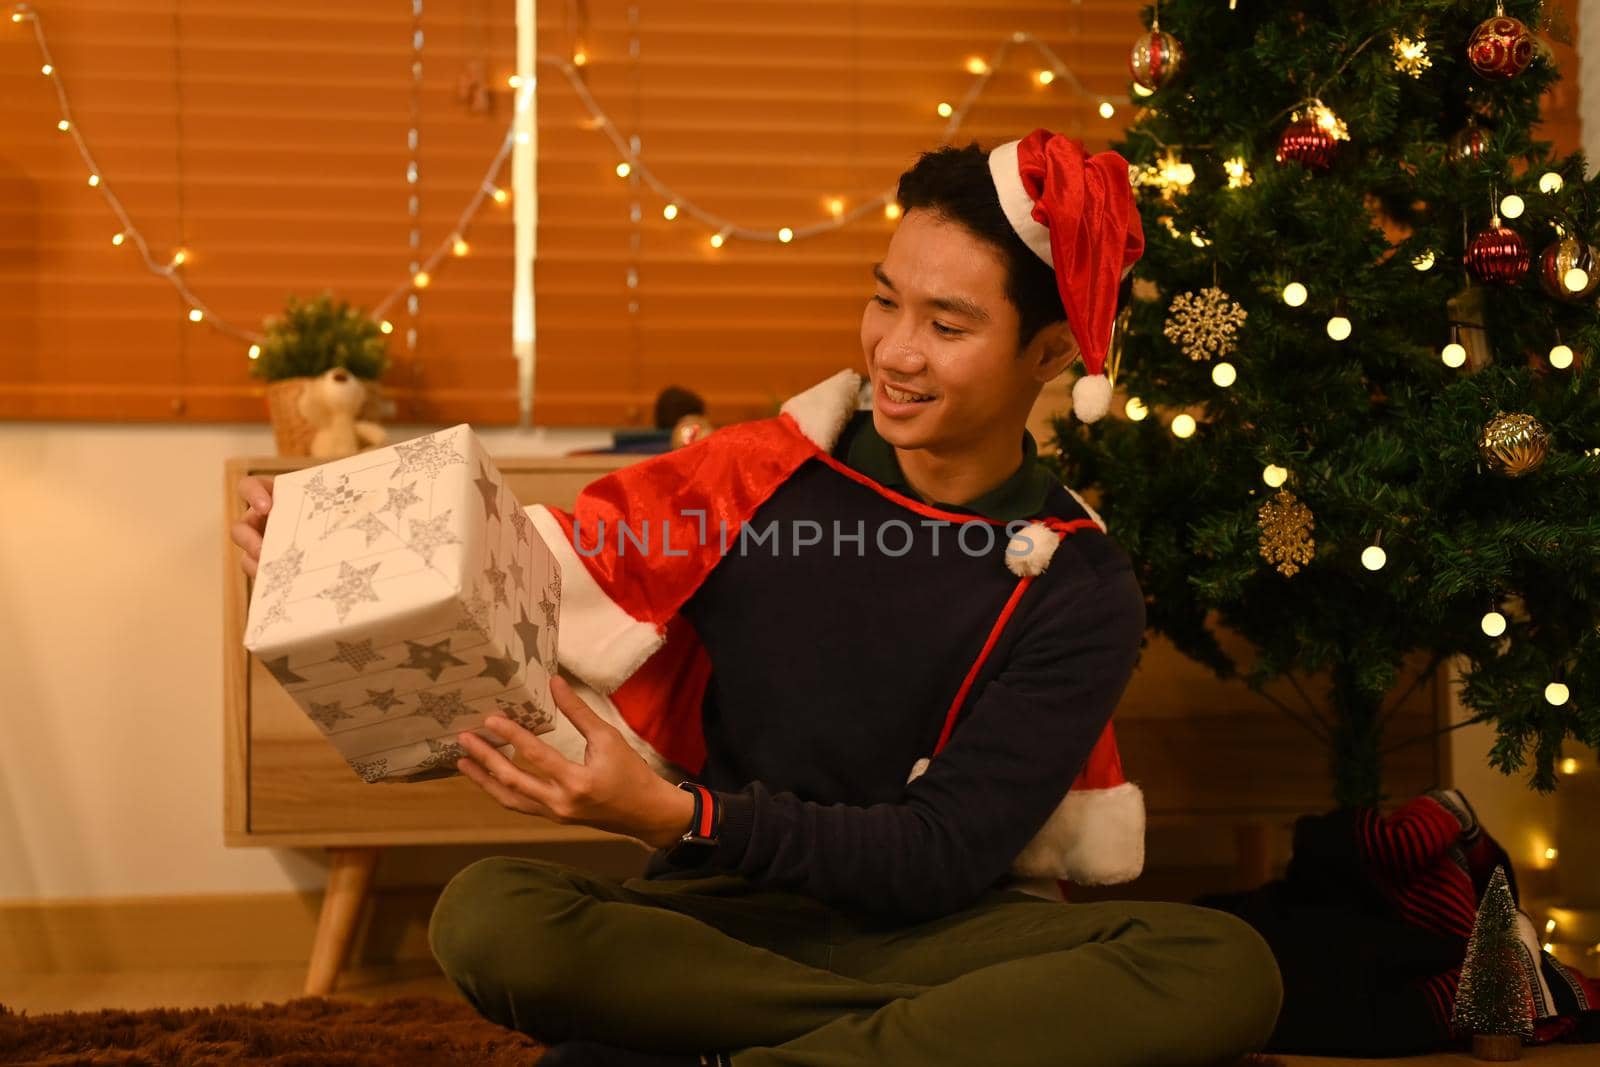 Man in Santa hat opening Christmas gifts, sitting near Christmas tree in decorated room lighted with soft lights by prathanchorruangsak